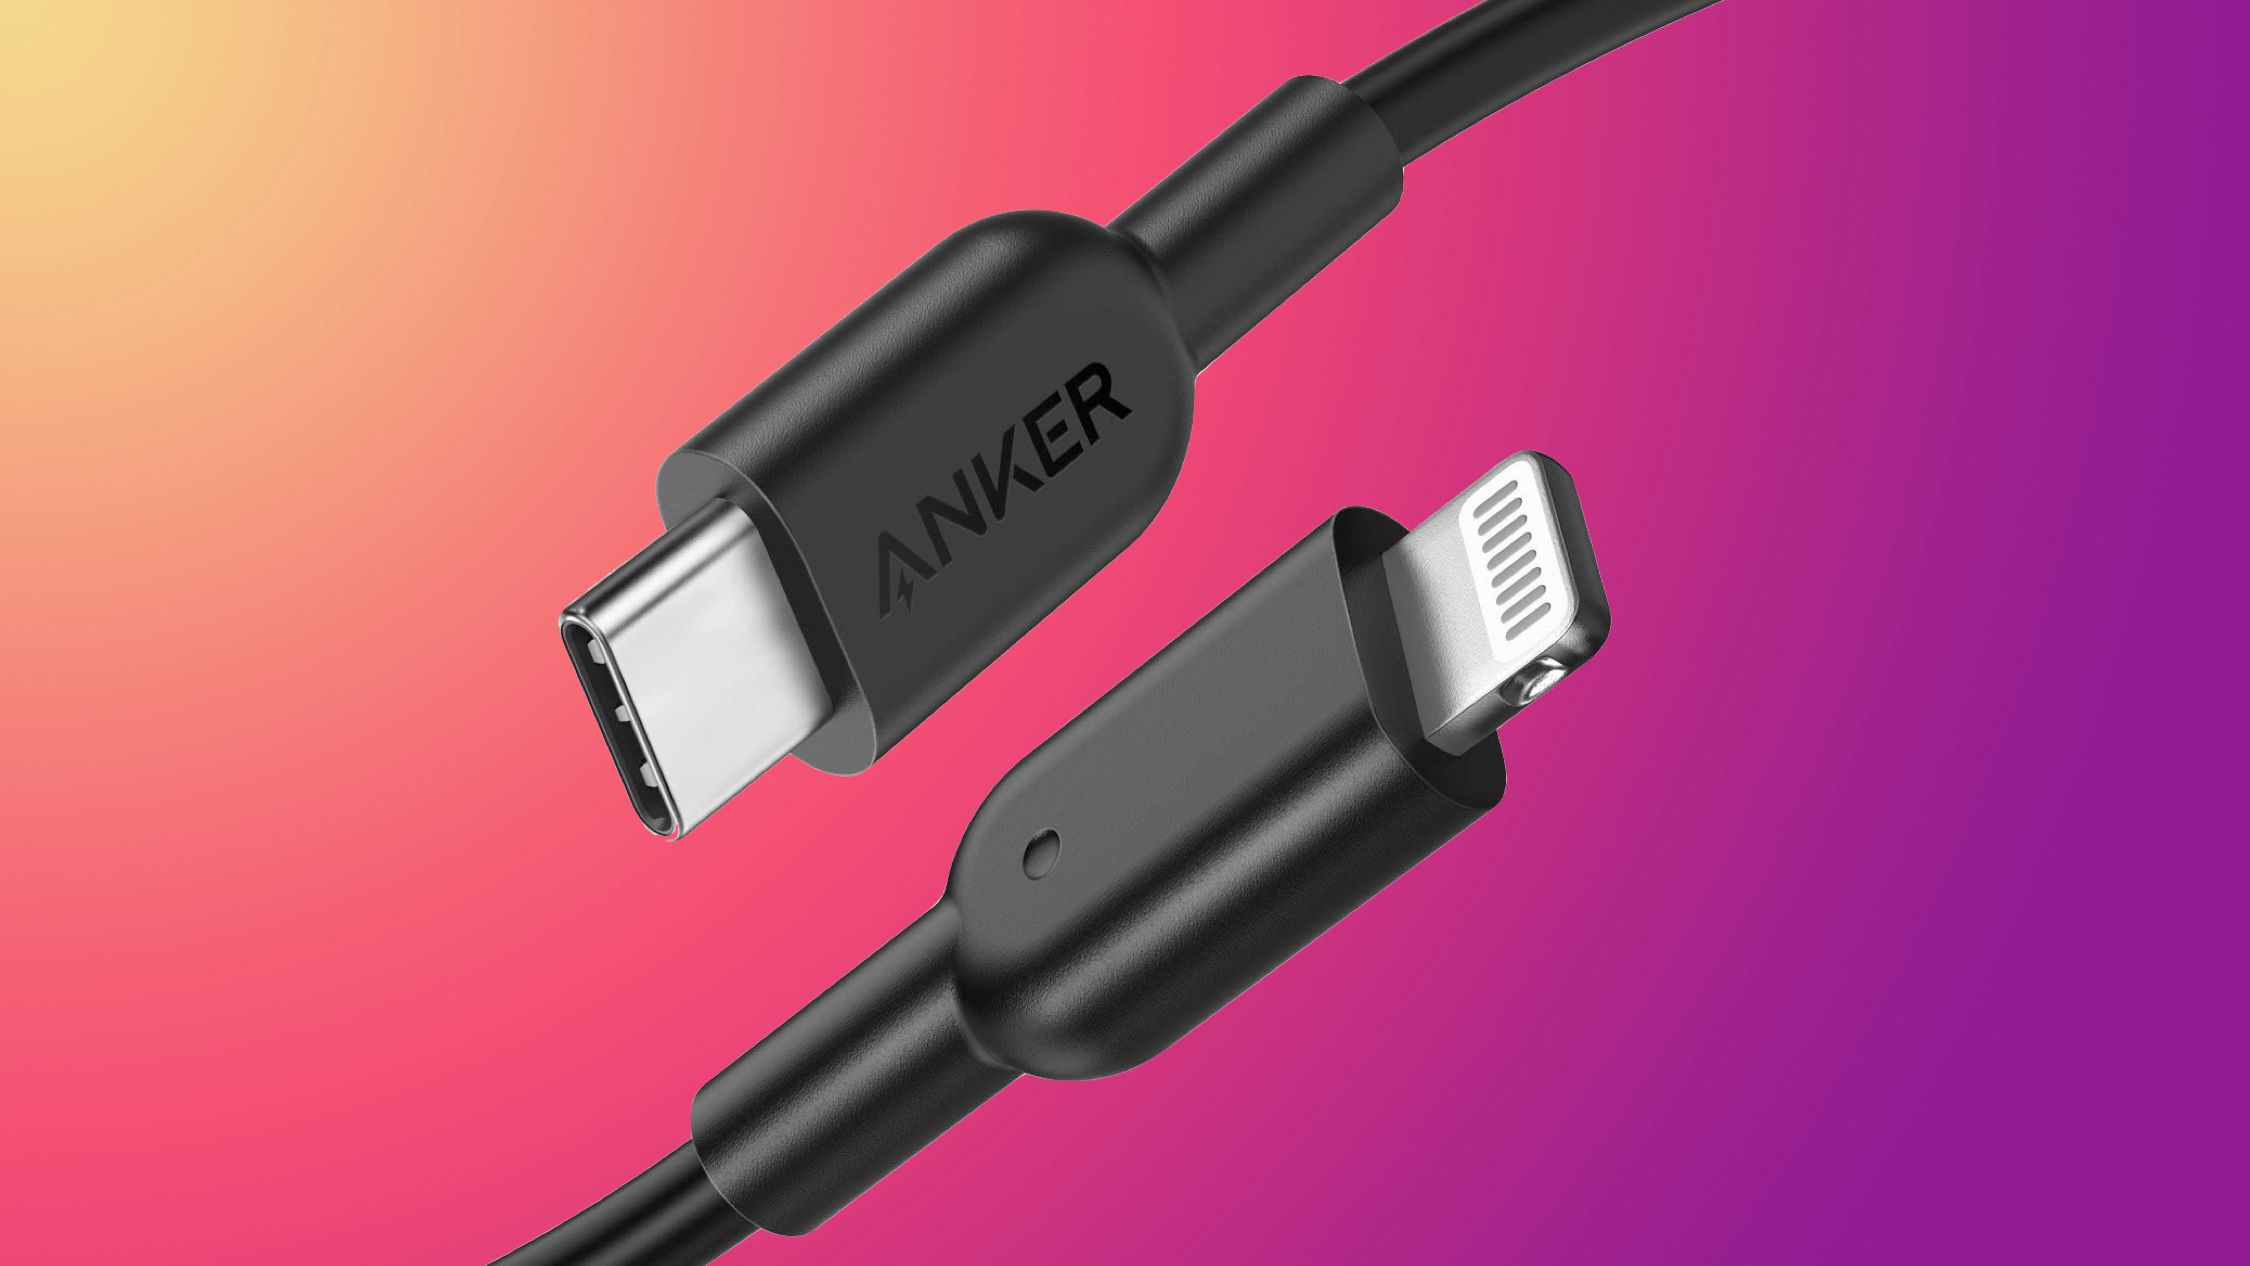 Offers: Save on Anker’s Ideal USB-C Add-ons on Amazon and Get Apple’s MagSafe Charger for $31.99 on Woot